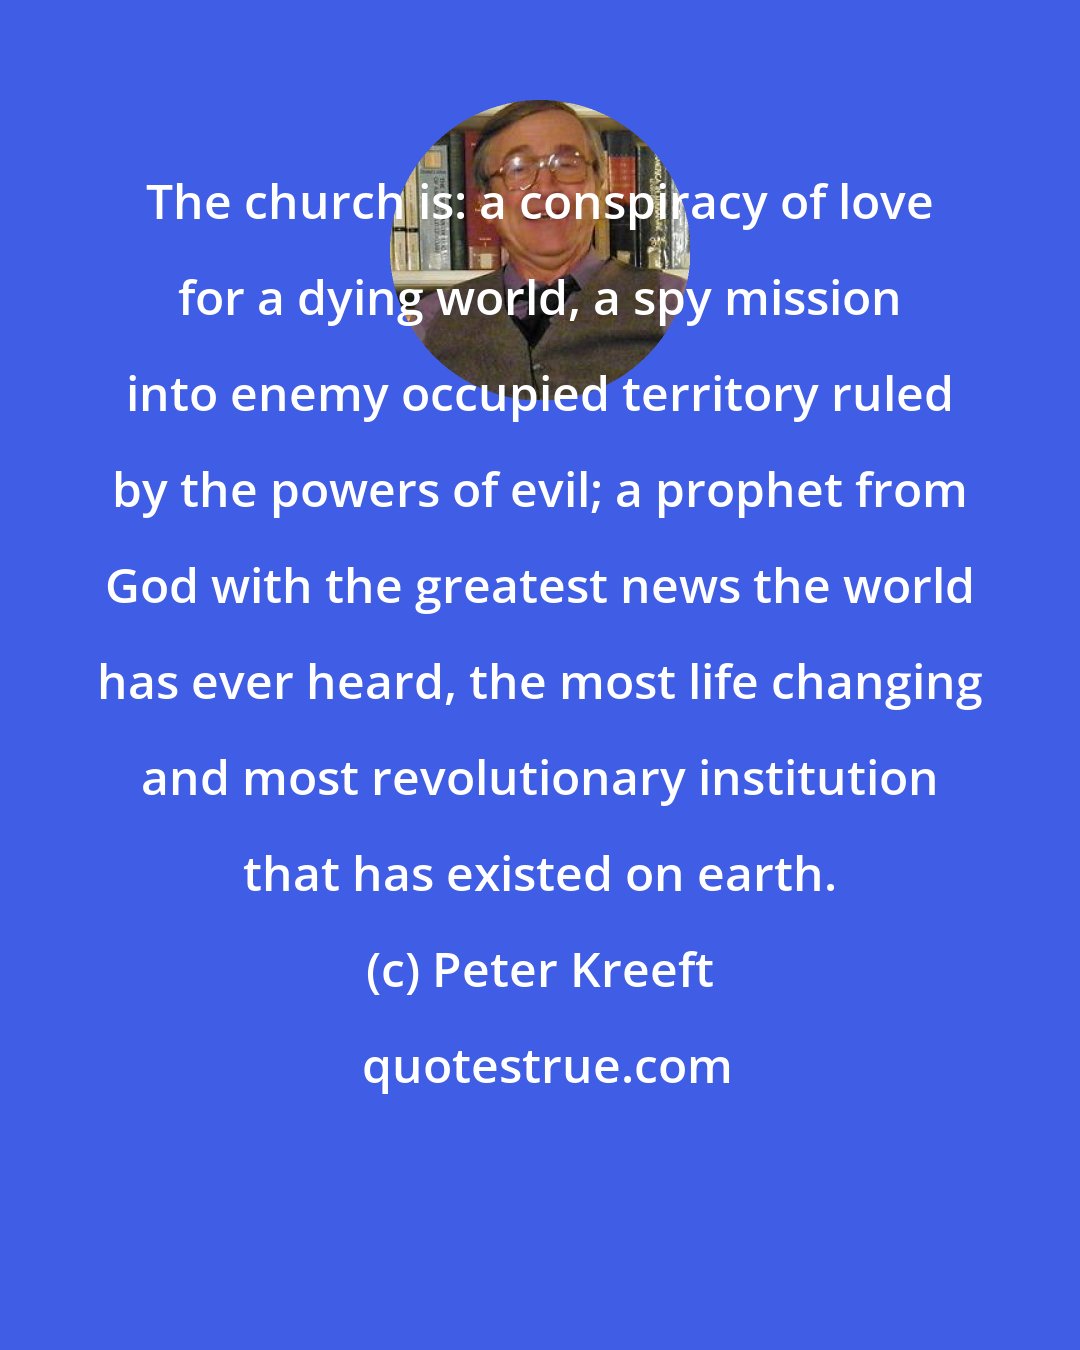 Peter Kreeft: The church is: a conspiracy of love for a dying world, a spy mission into enemy occupied territory ruled by the powers of evil; a prophet from God with the greatest news the world has ever heard, the most life changing and most revolutionary institution that has existed on earth.